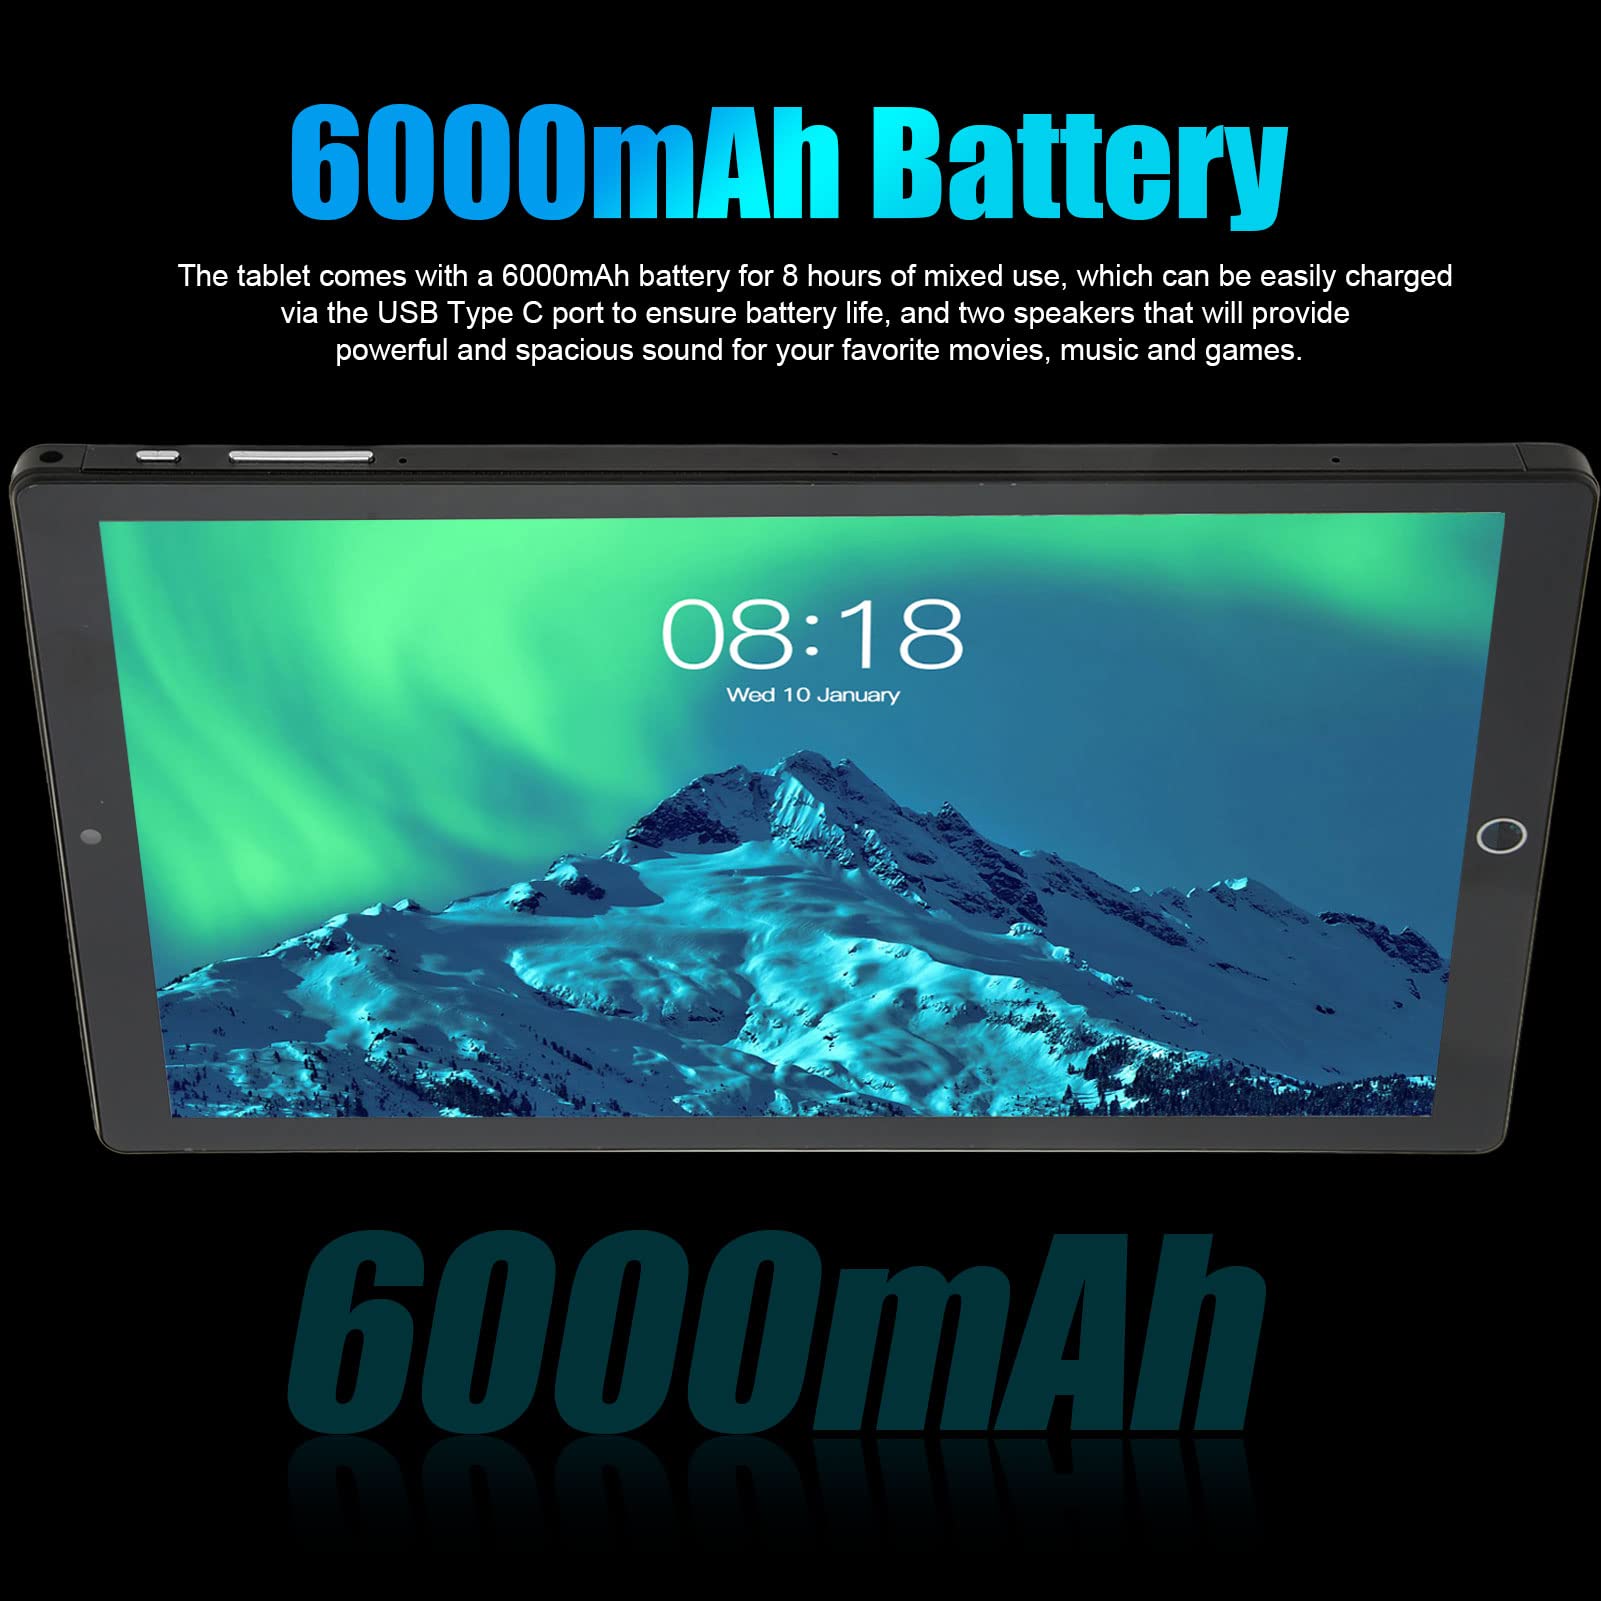 Tablet 10.1 Inch, 2.4G 5G WiFi Tablet and Phone, 6G RAM 128G ROM, 1920x1080 IPS HD Touchscreen, 5MP 13M Camers, PMT6753 Octa Core, Dual Careds, BT, AM, FM, GPS, 6000mAh